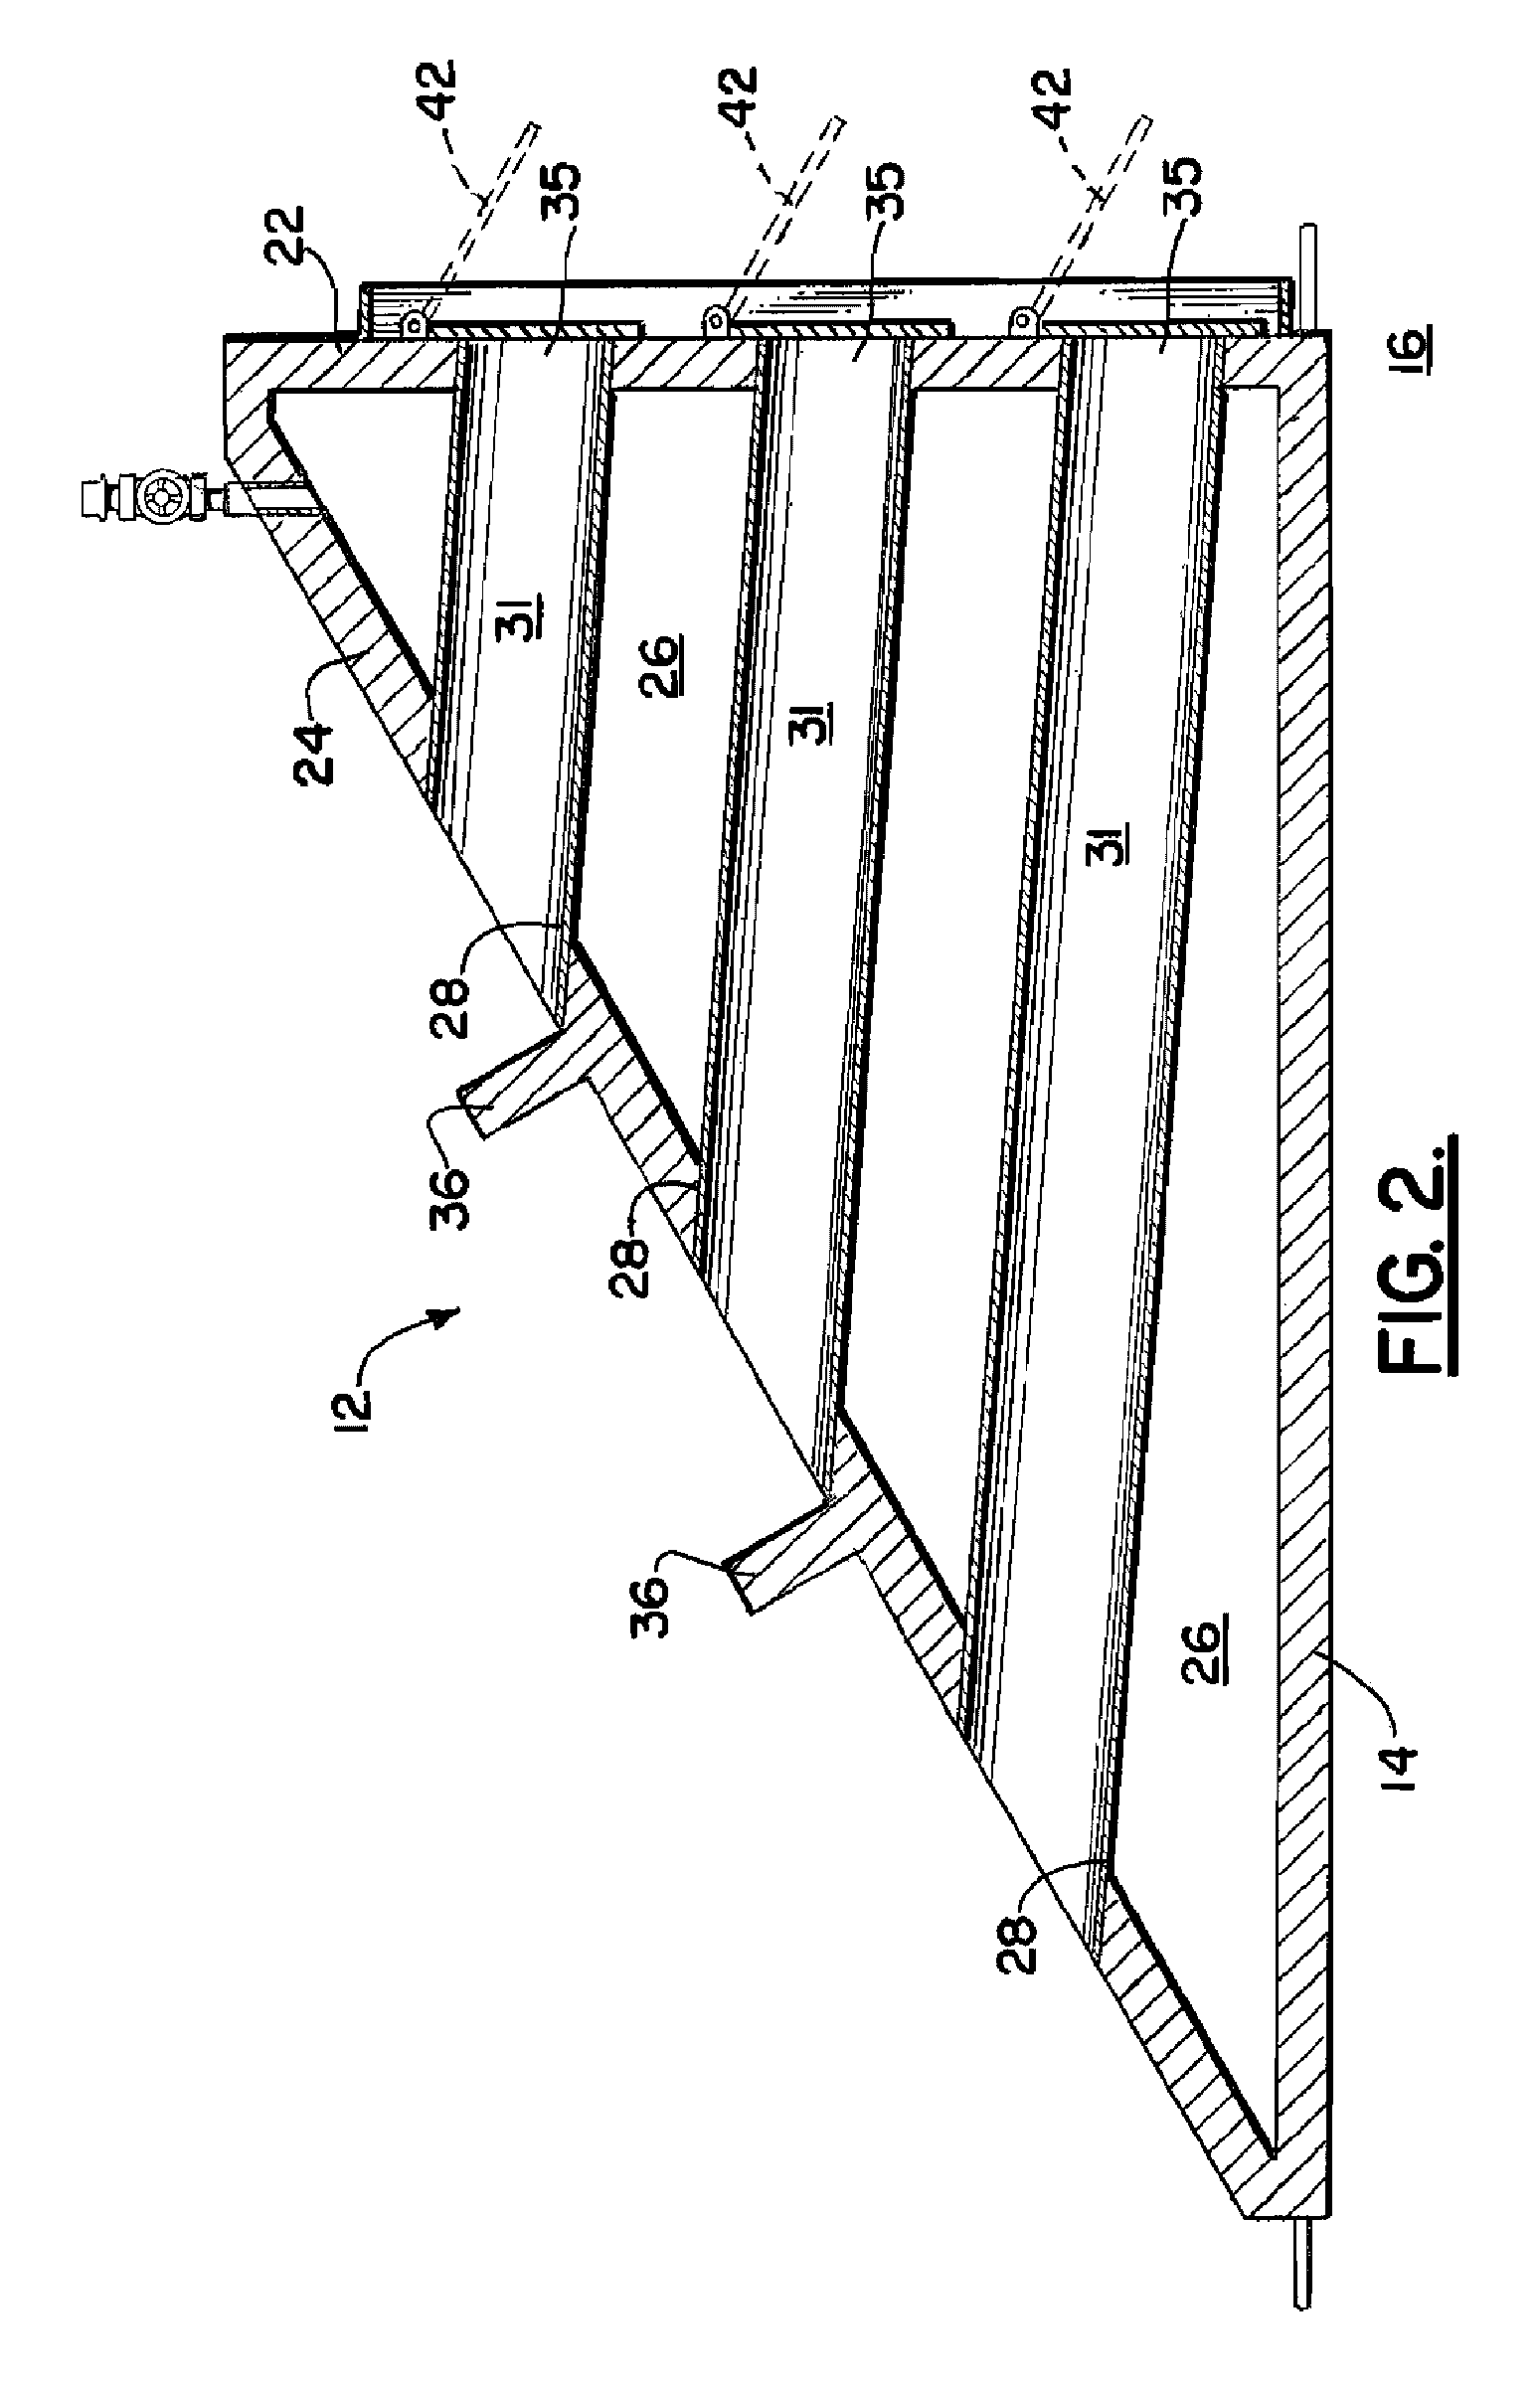 Wave suppressor and sediment collection system